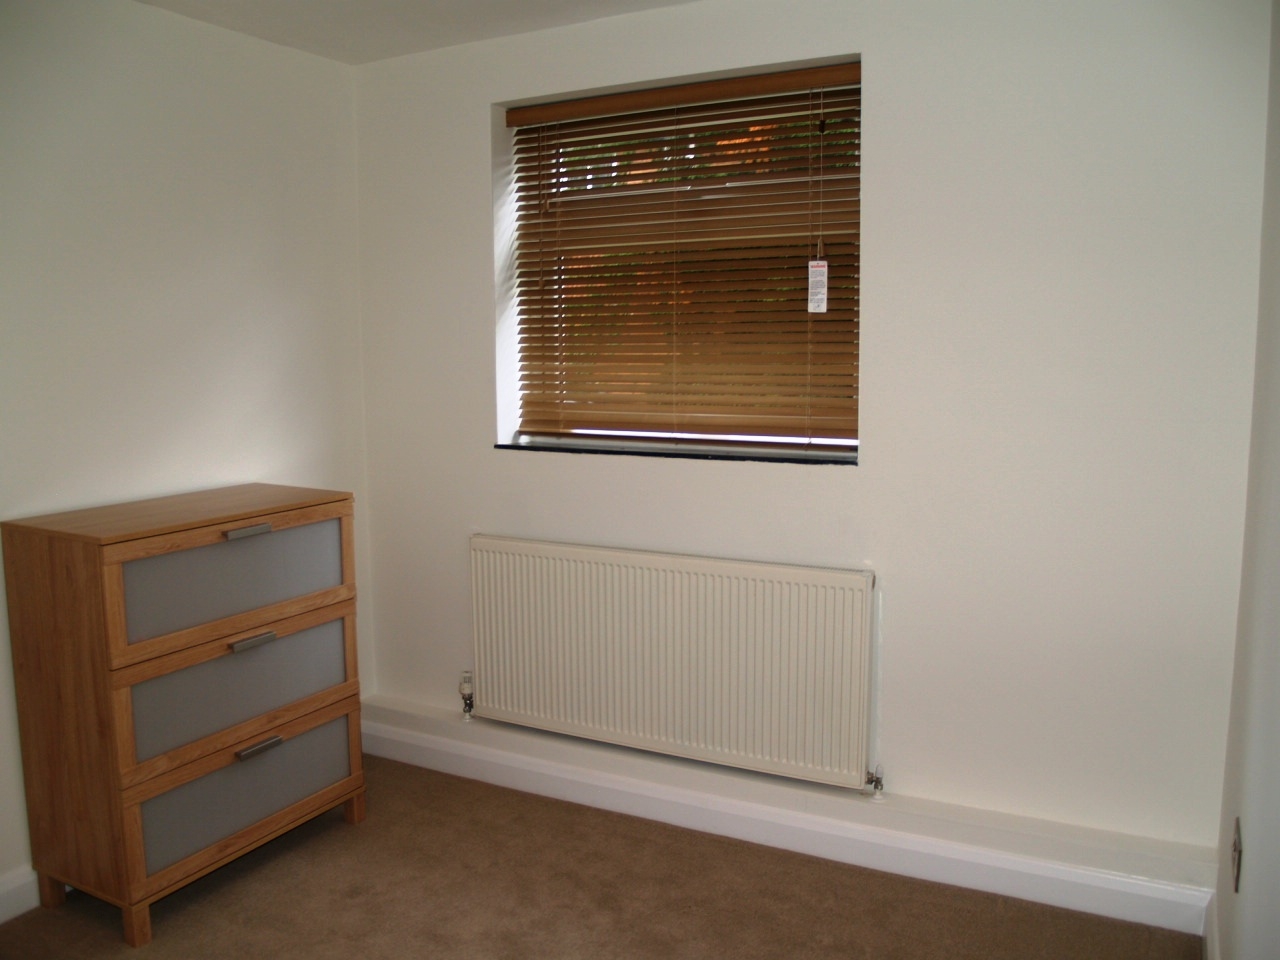 2 bedroom ground floor apartment Application Made in Solihull - photograph 9.